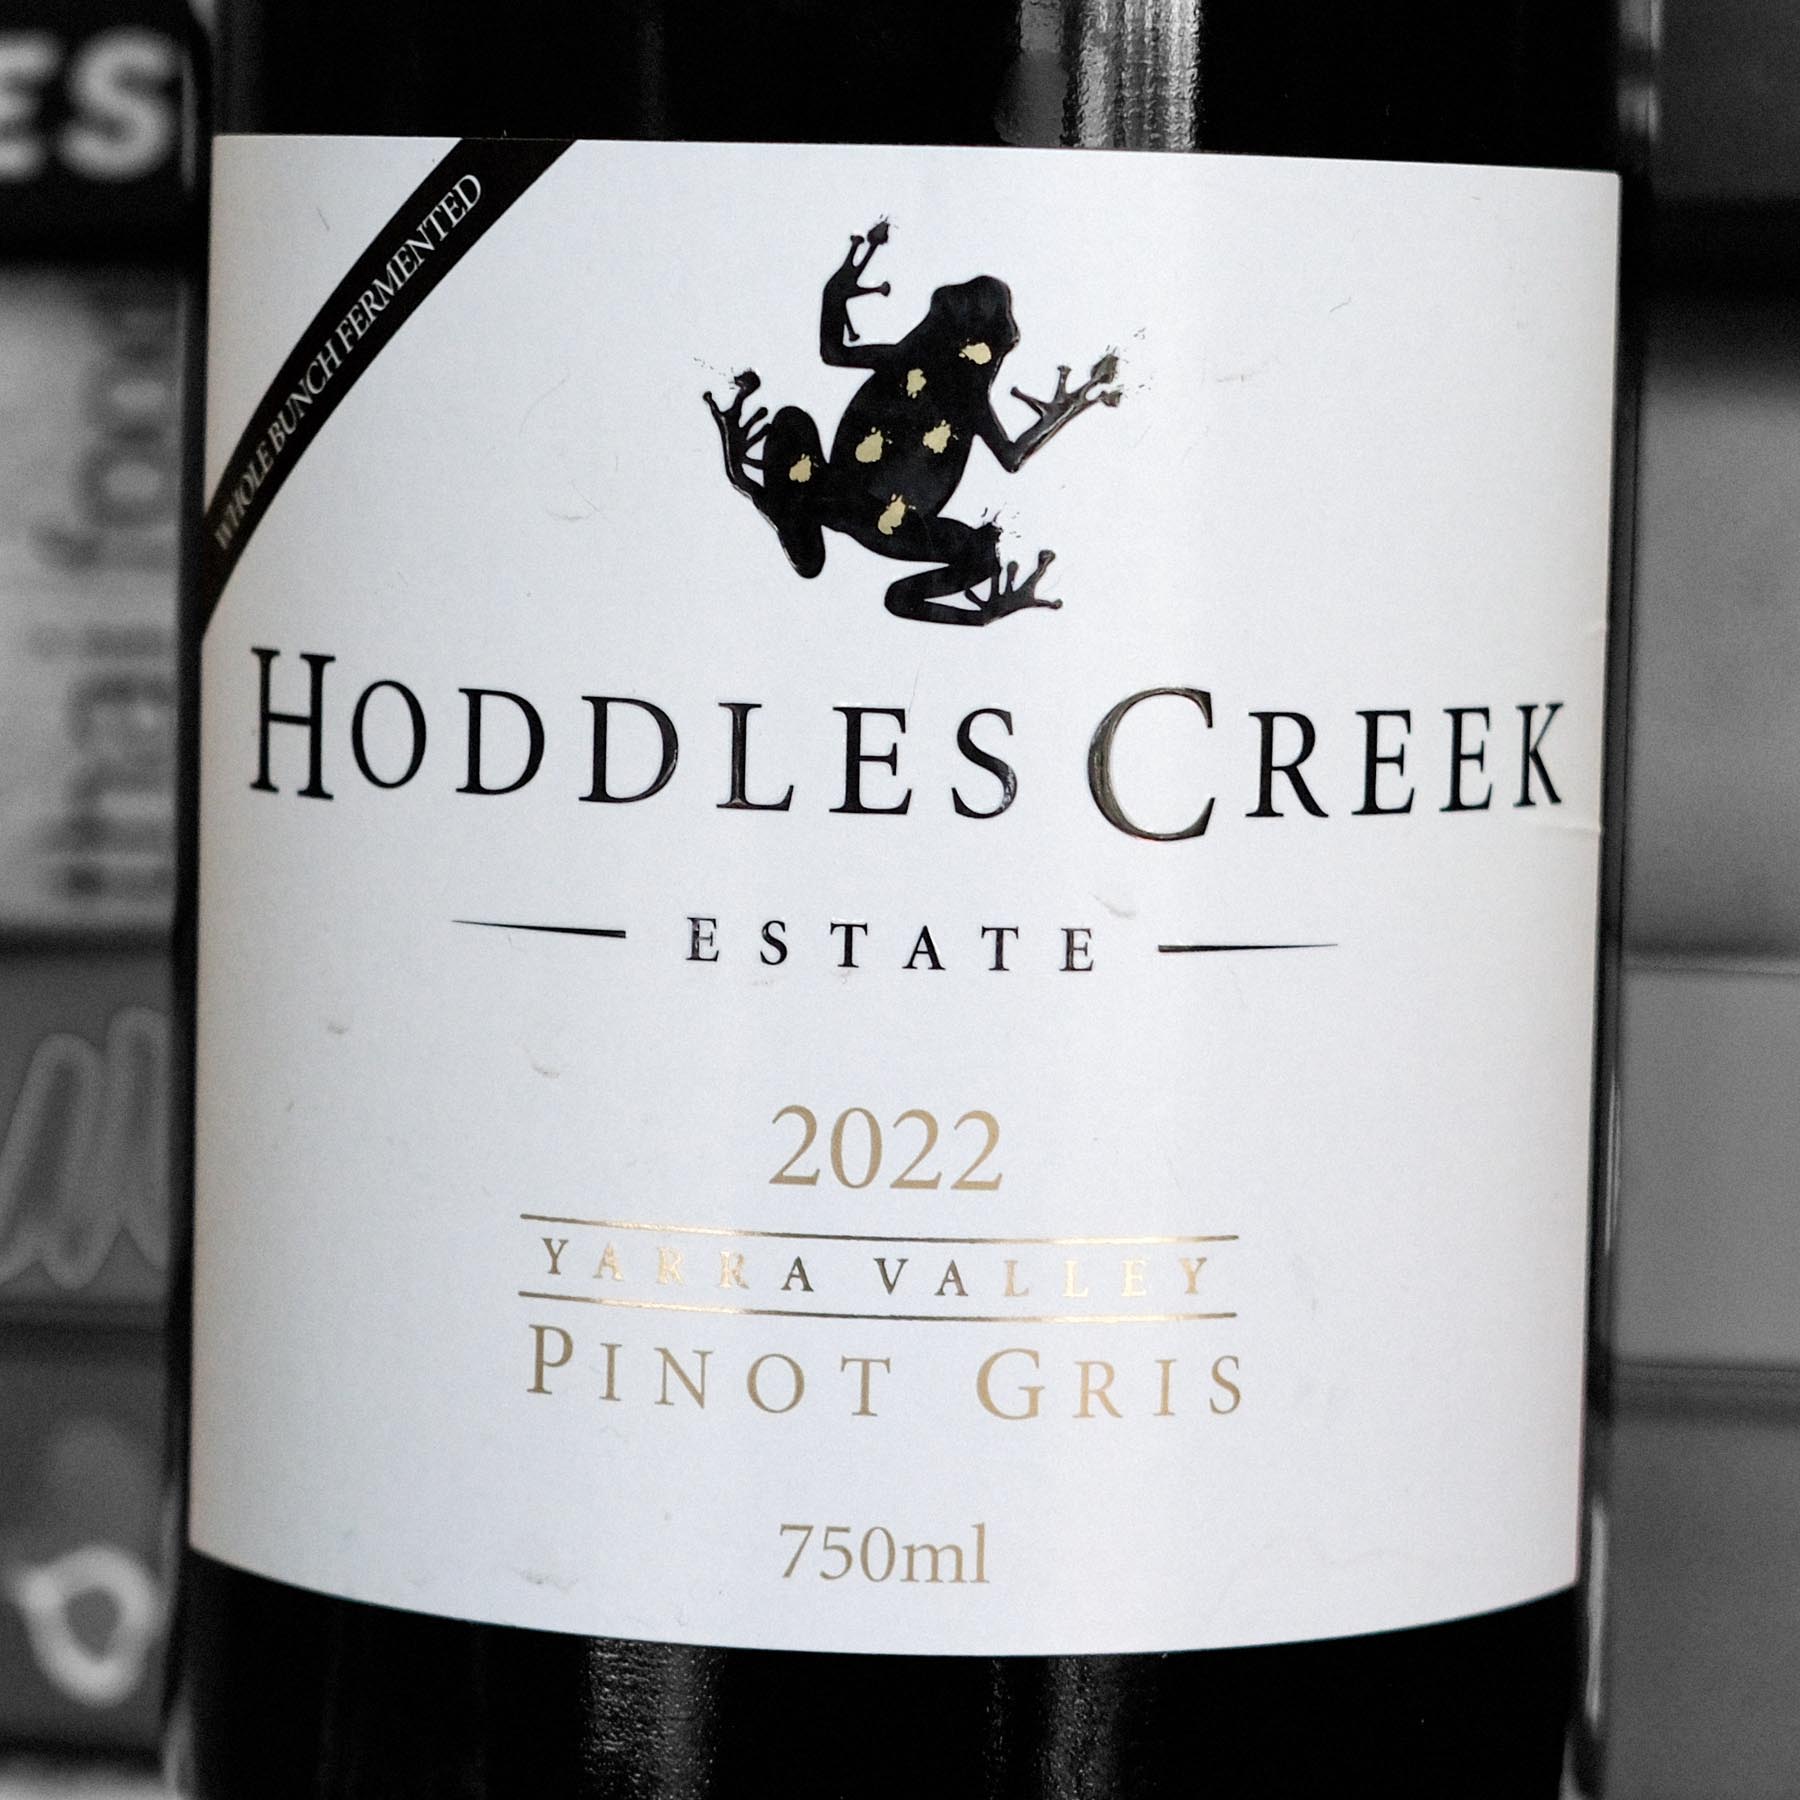 Hoddle's Creek Estate Whole Bunch Fermented Pinot Gris 2022 Yarra Valley, Vic